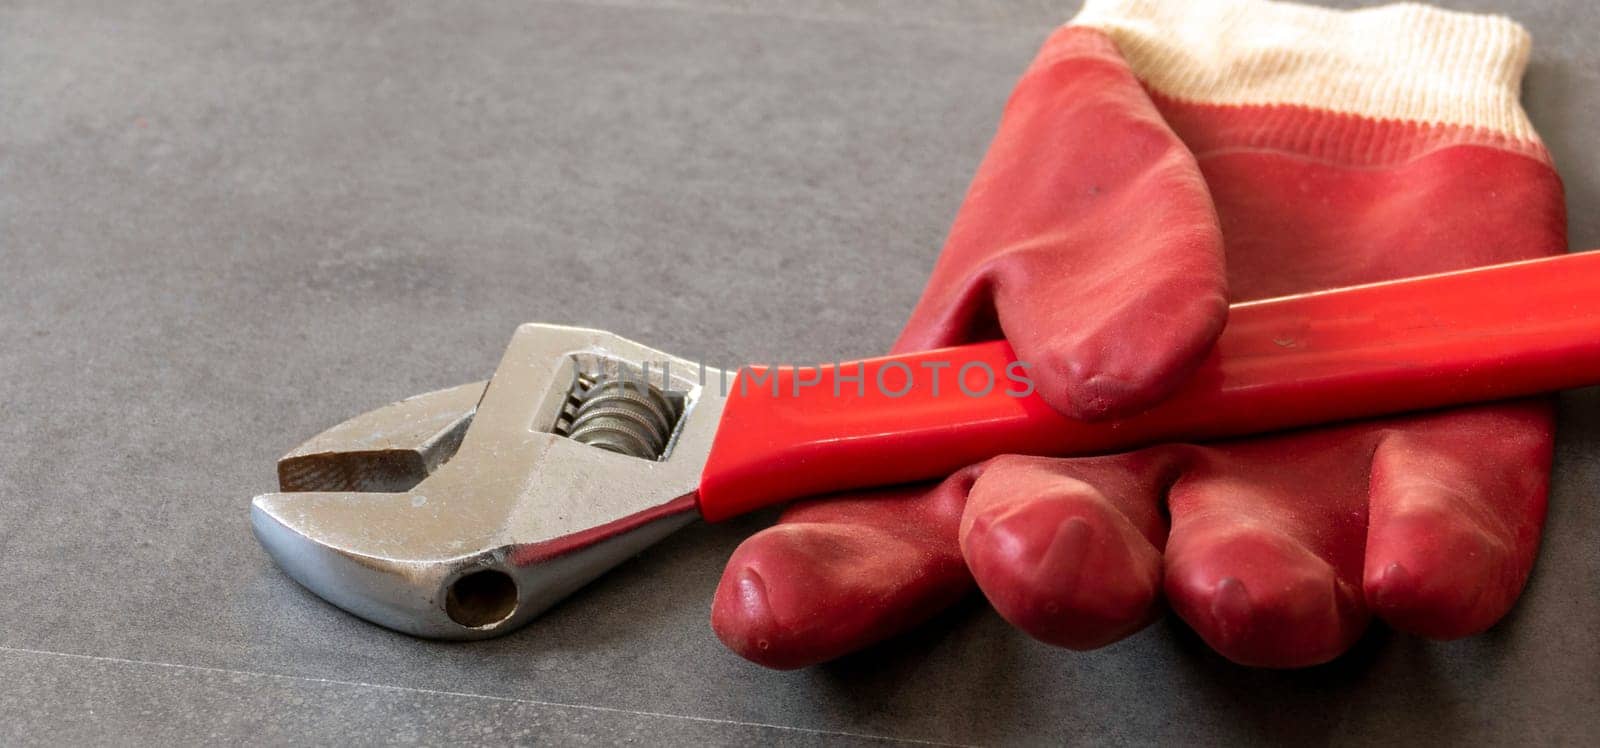 For work safety, it is necessary to work with gloves, a wrench, thick plastic gloves are standing on a floor, by nhatipoglu